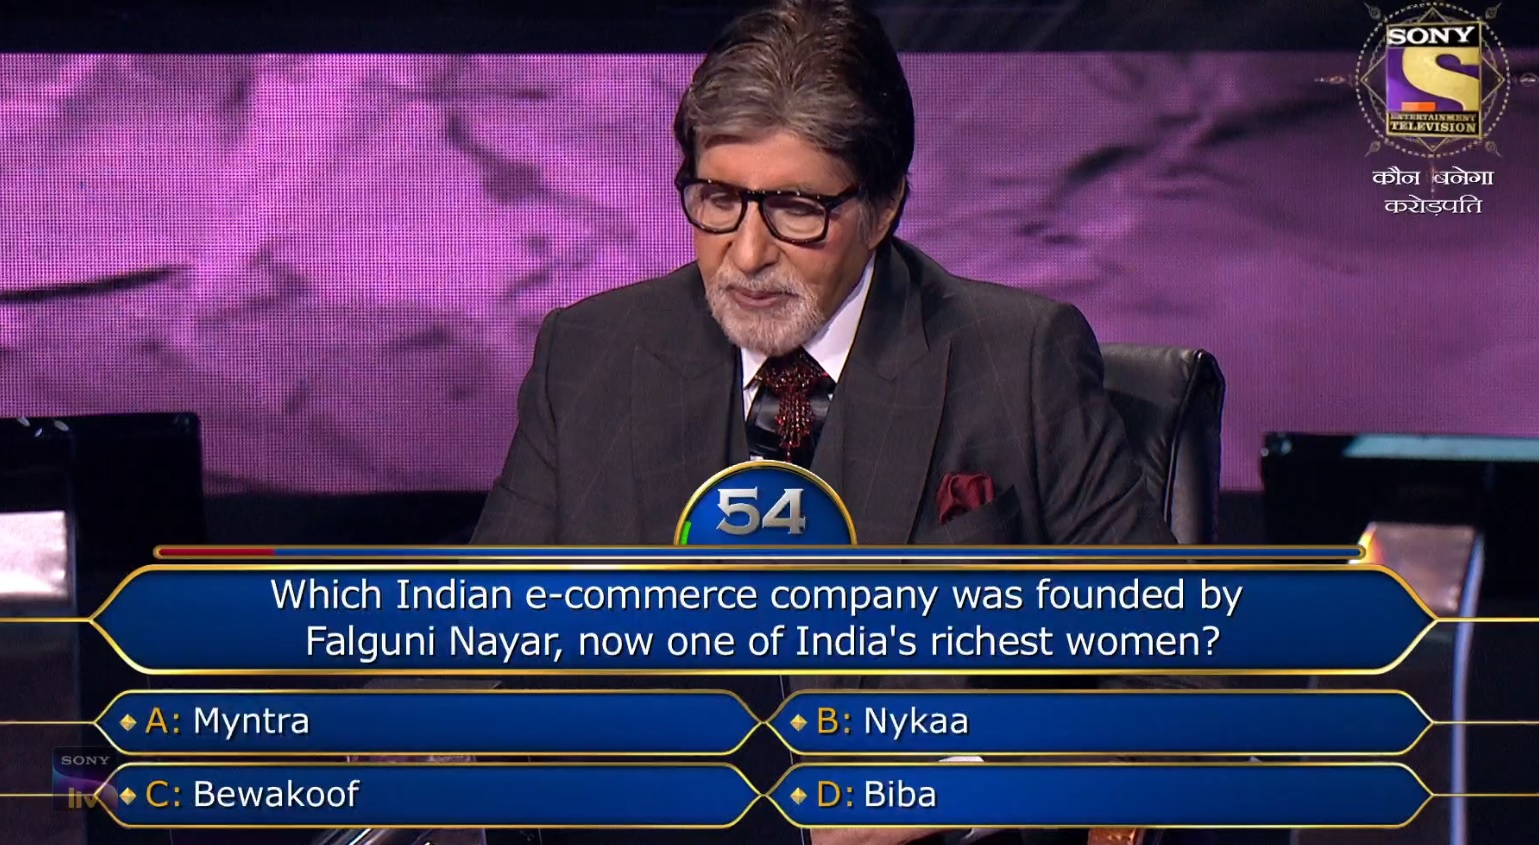 Ques : Which Indian e-commerce company was founded by Falguni Nayar, now one of India’s richest women?